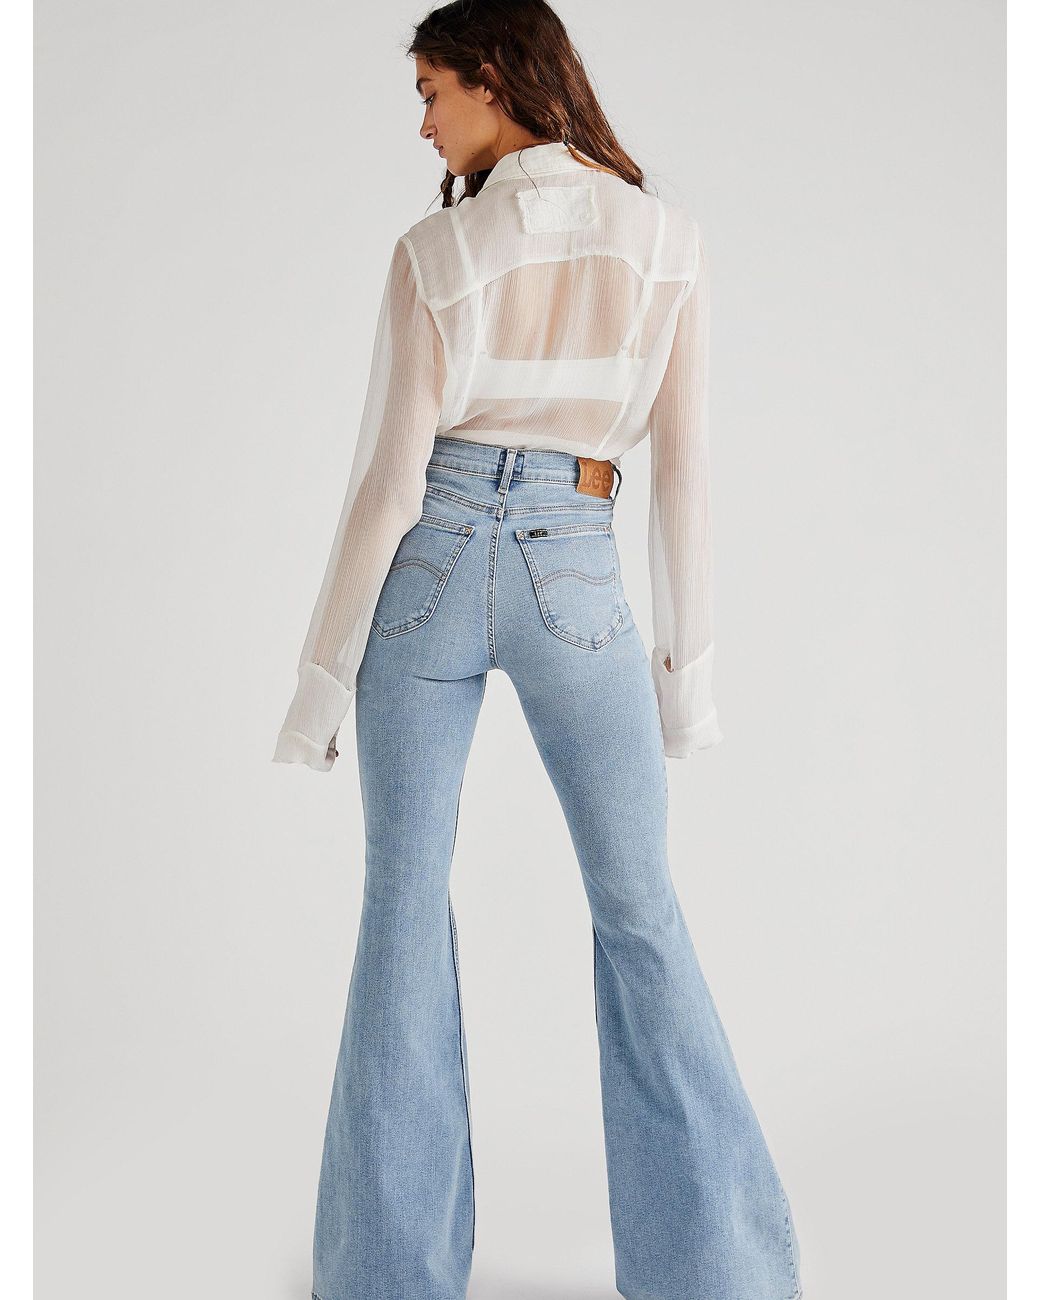 Free People Jeans Évasé Taille Haute Lee Sized For You in White | Lyst